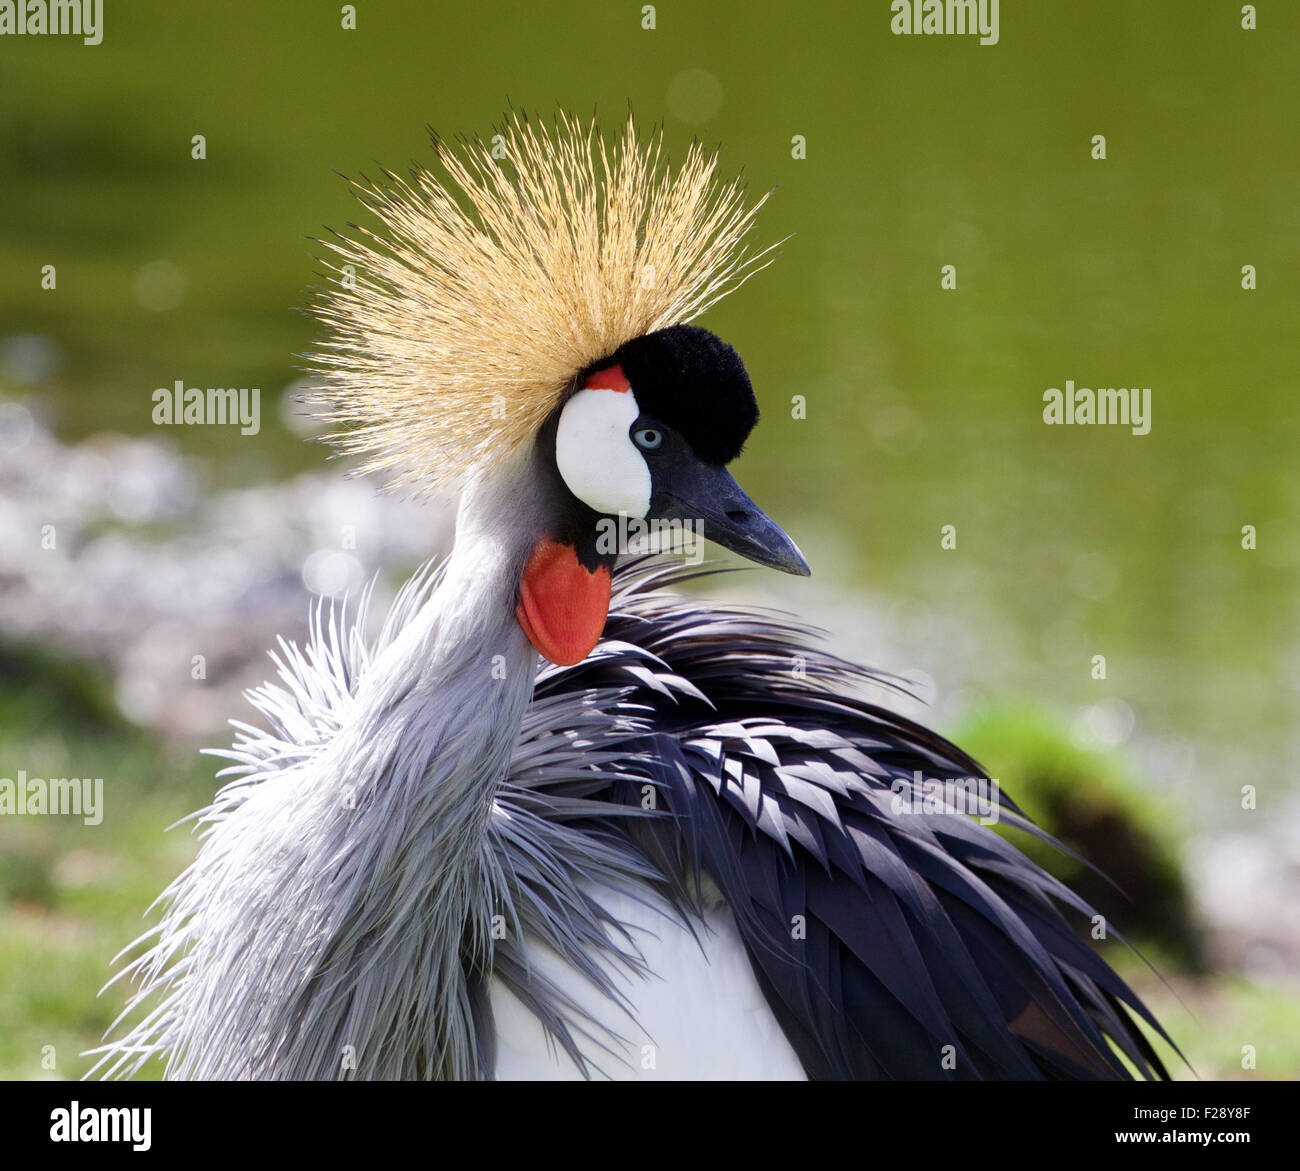 The portrait of the beautiful bird East African Crowned Crane Stock Photo